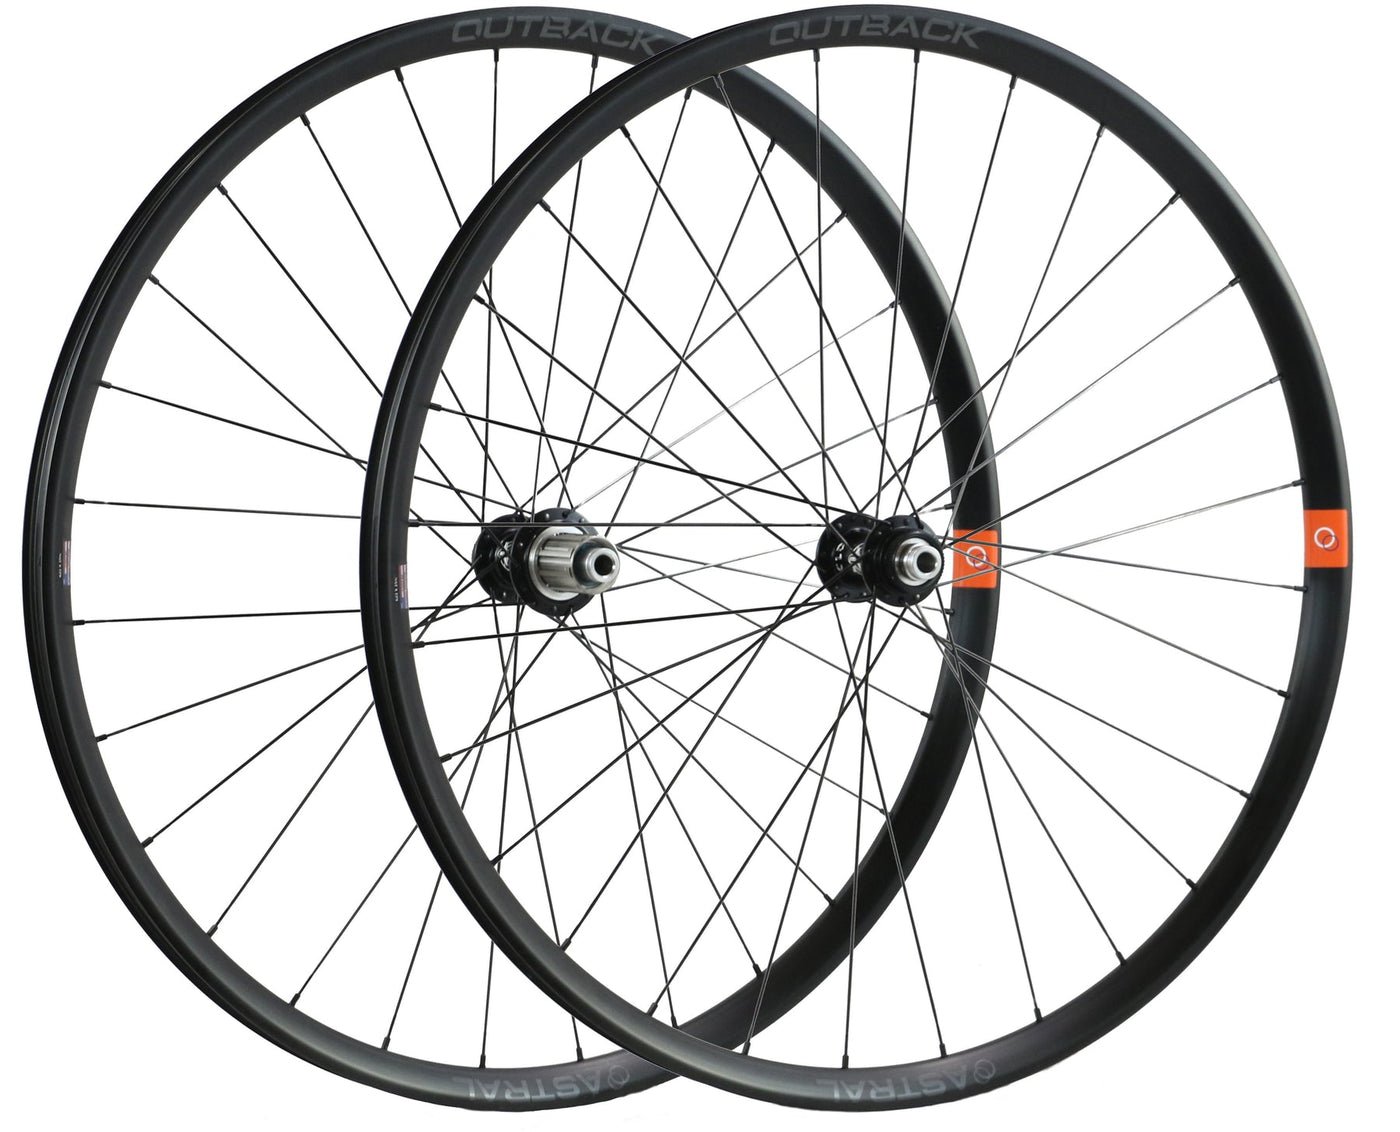 Astral Outback Alloy Disc Rims to Astral Approach CL Hubs